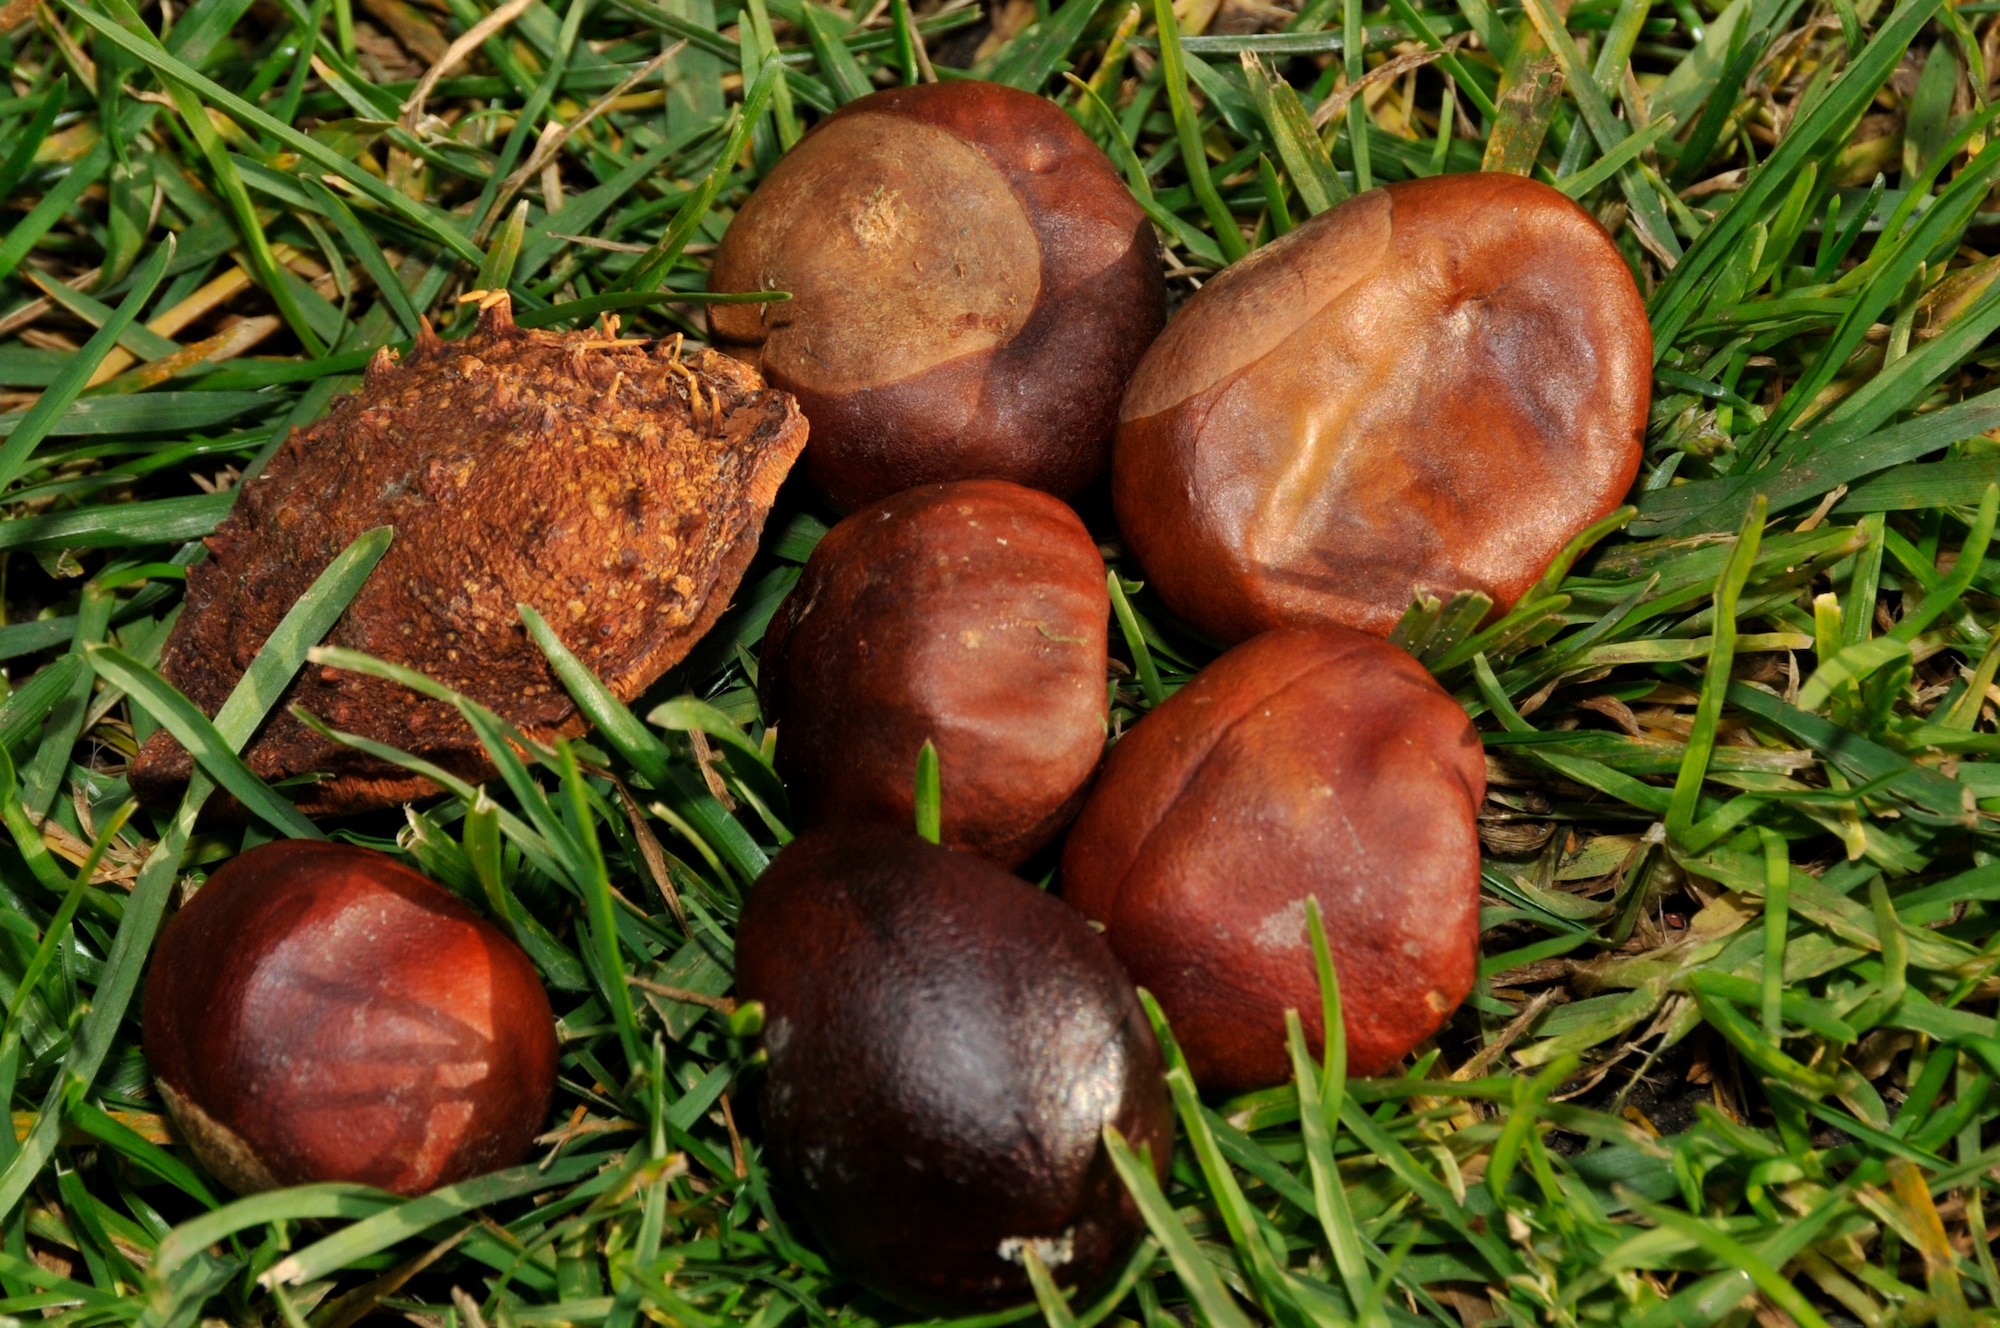 Conkers are hard brown nuts found in a prickly case that fall from the horse chestnut tree when ripe. A playground favourite in the U.K. for as long as there have been playgrounds and horse chestnut trees, conkers were introduced into Britain in the 1600s. The first recorded game of conkers dates back to 1848 on the Isle of Wight.  The origin of the name 'conker' is unclear but it's believed that it comes from the French word 'cogner' meaning to hit. ( Photo by A1C Perry Aston)